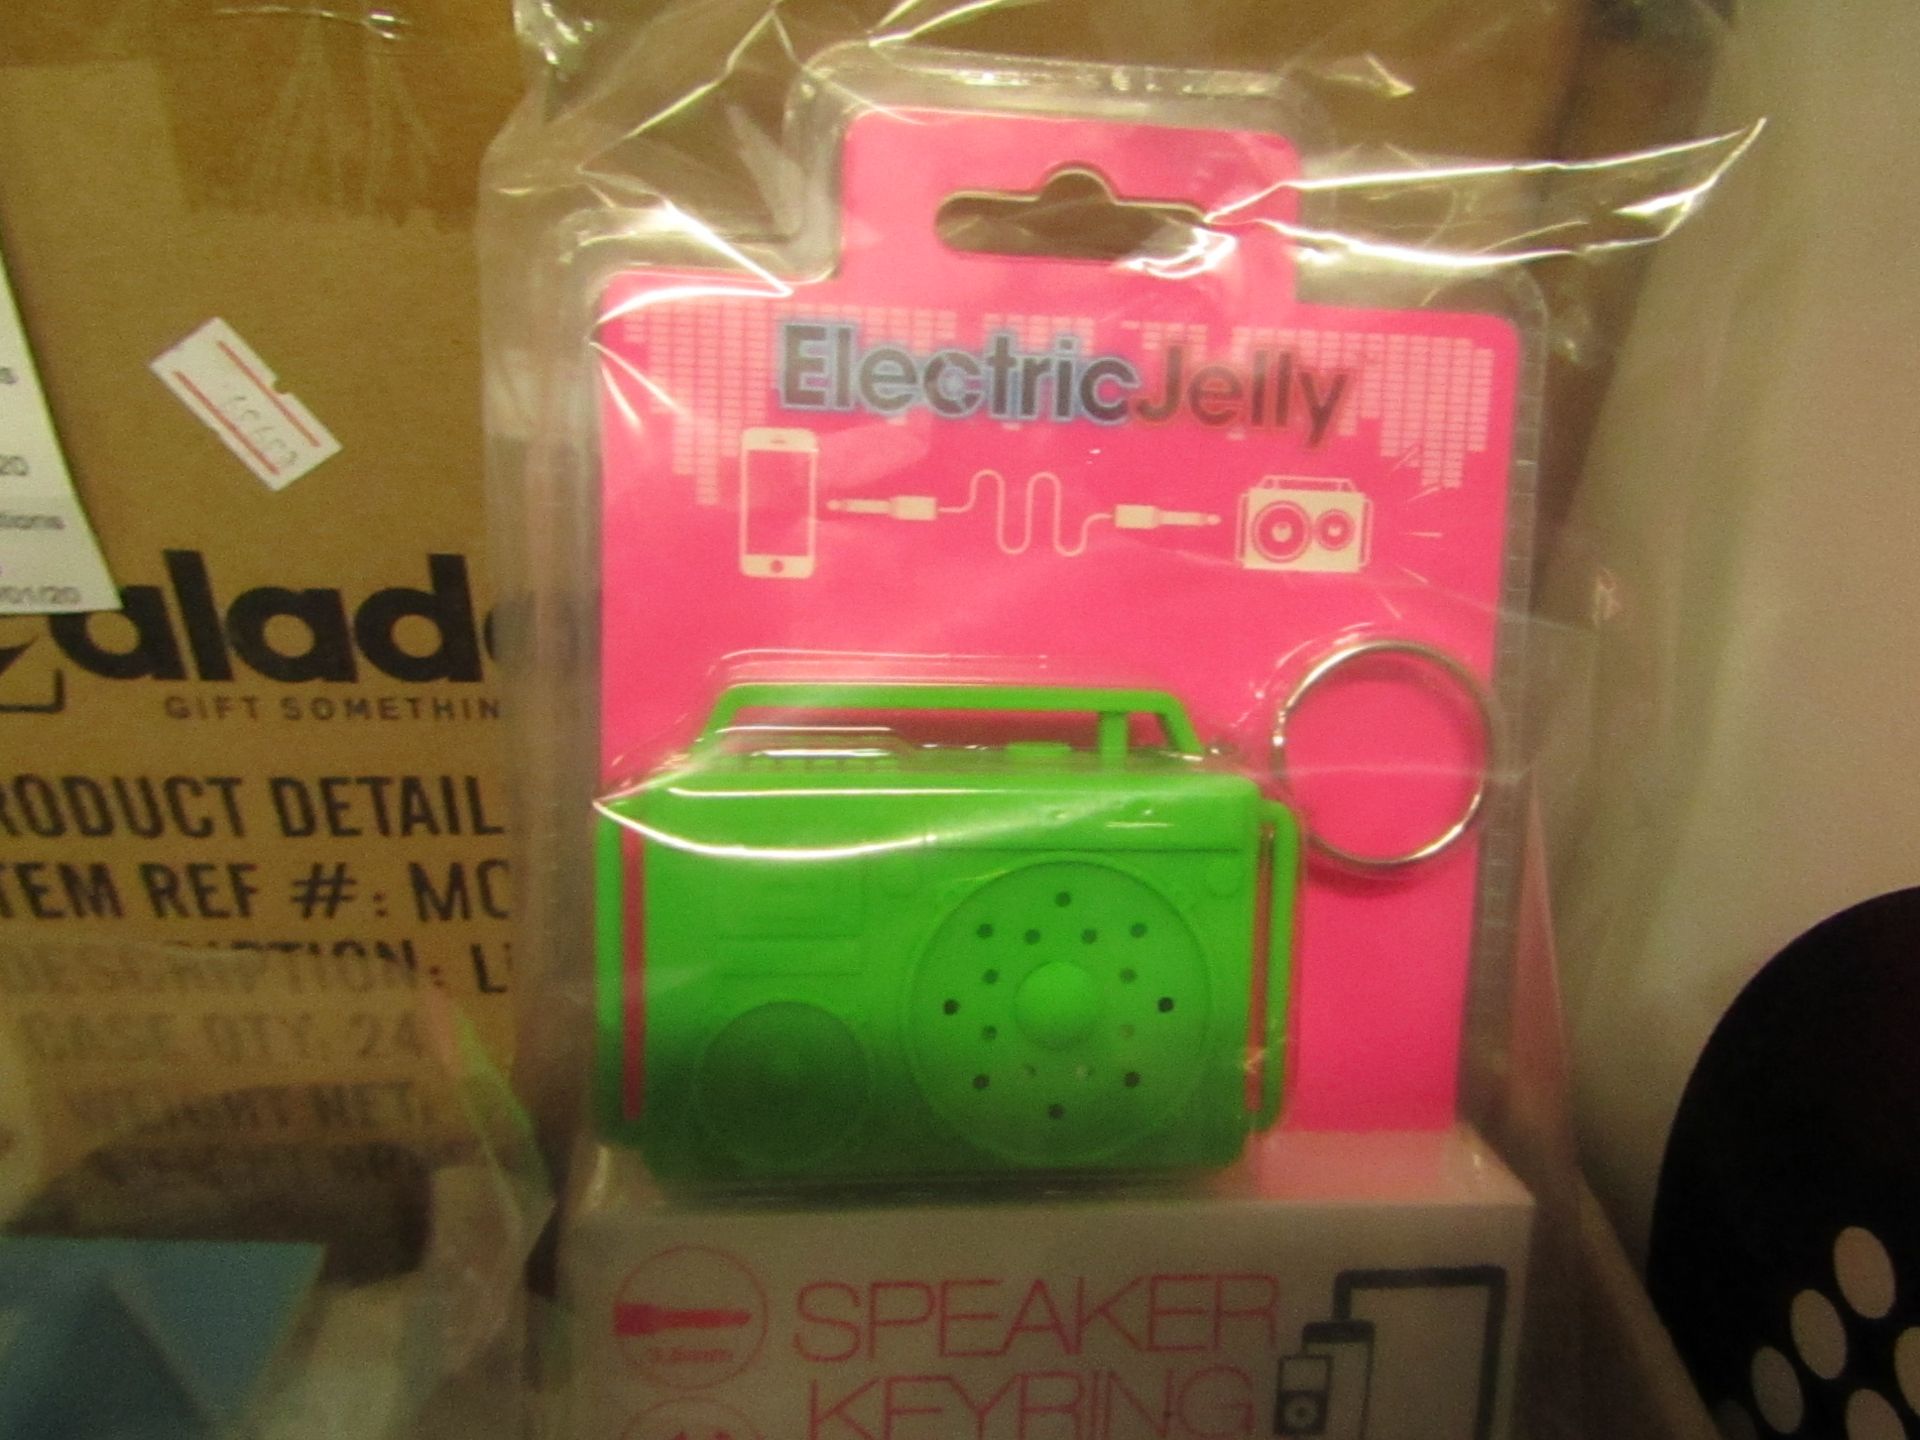 5X Electric Jelly - Speaker keyring (pink) - all packaged and boxed.